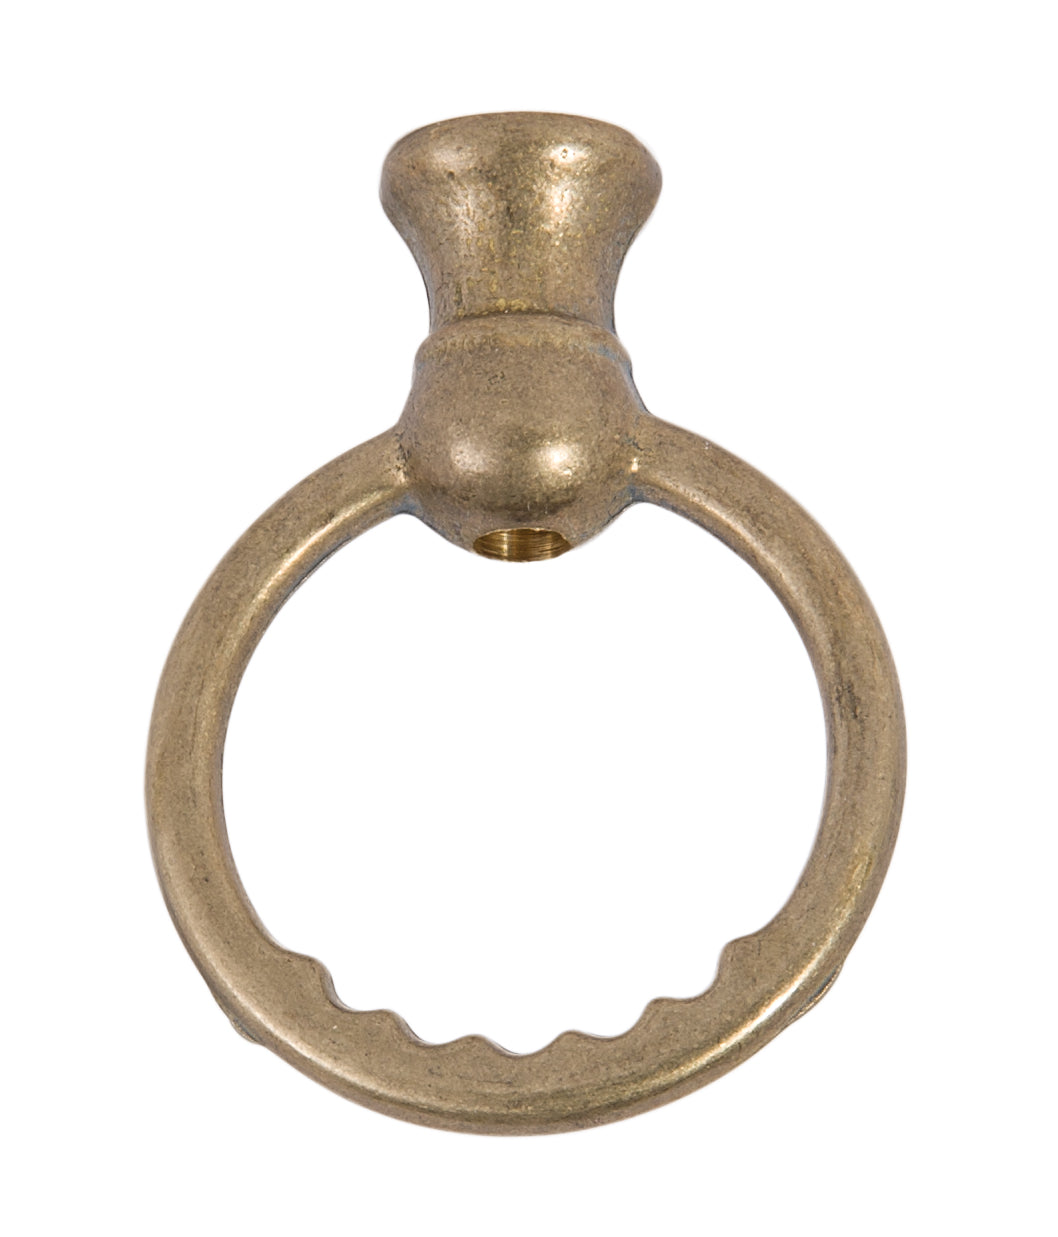 2-7/8" tall Cast Brass Hang Straight Loop with wire way, 2-1/8" diameter, tap 1/8F (3/8" diameter), unfinished